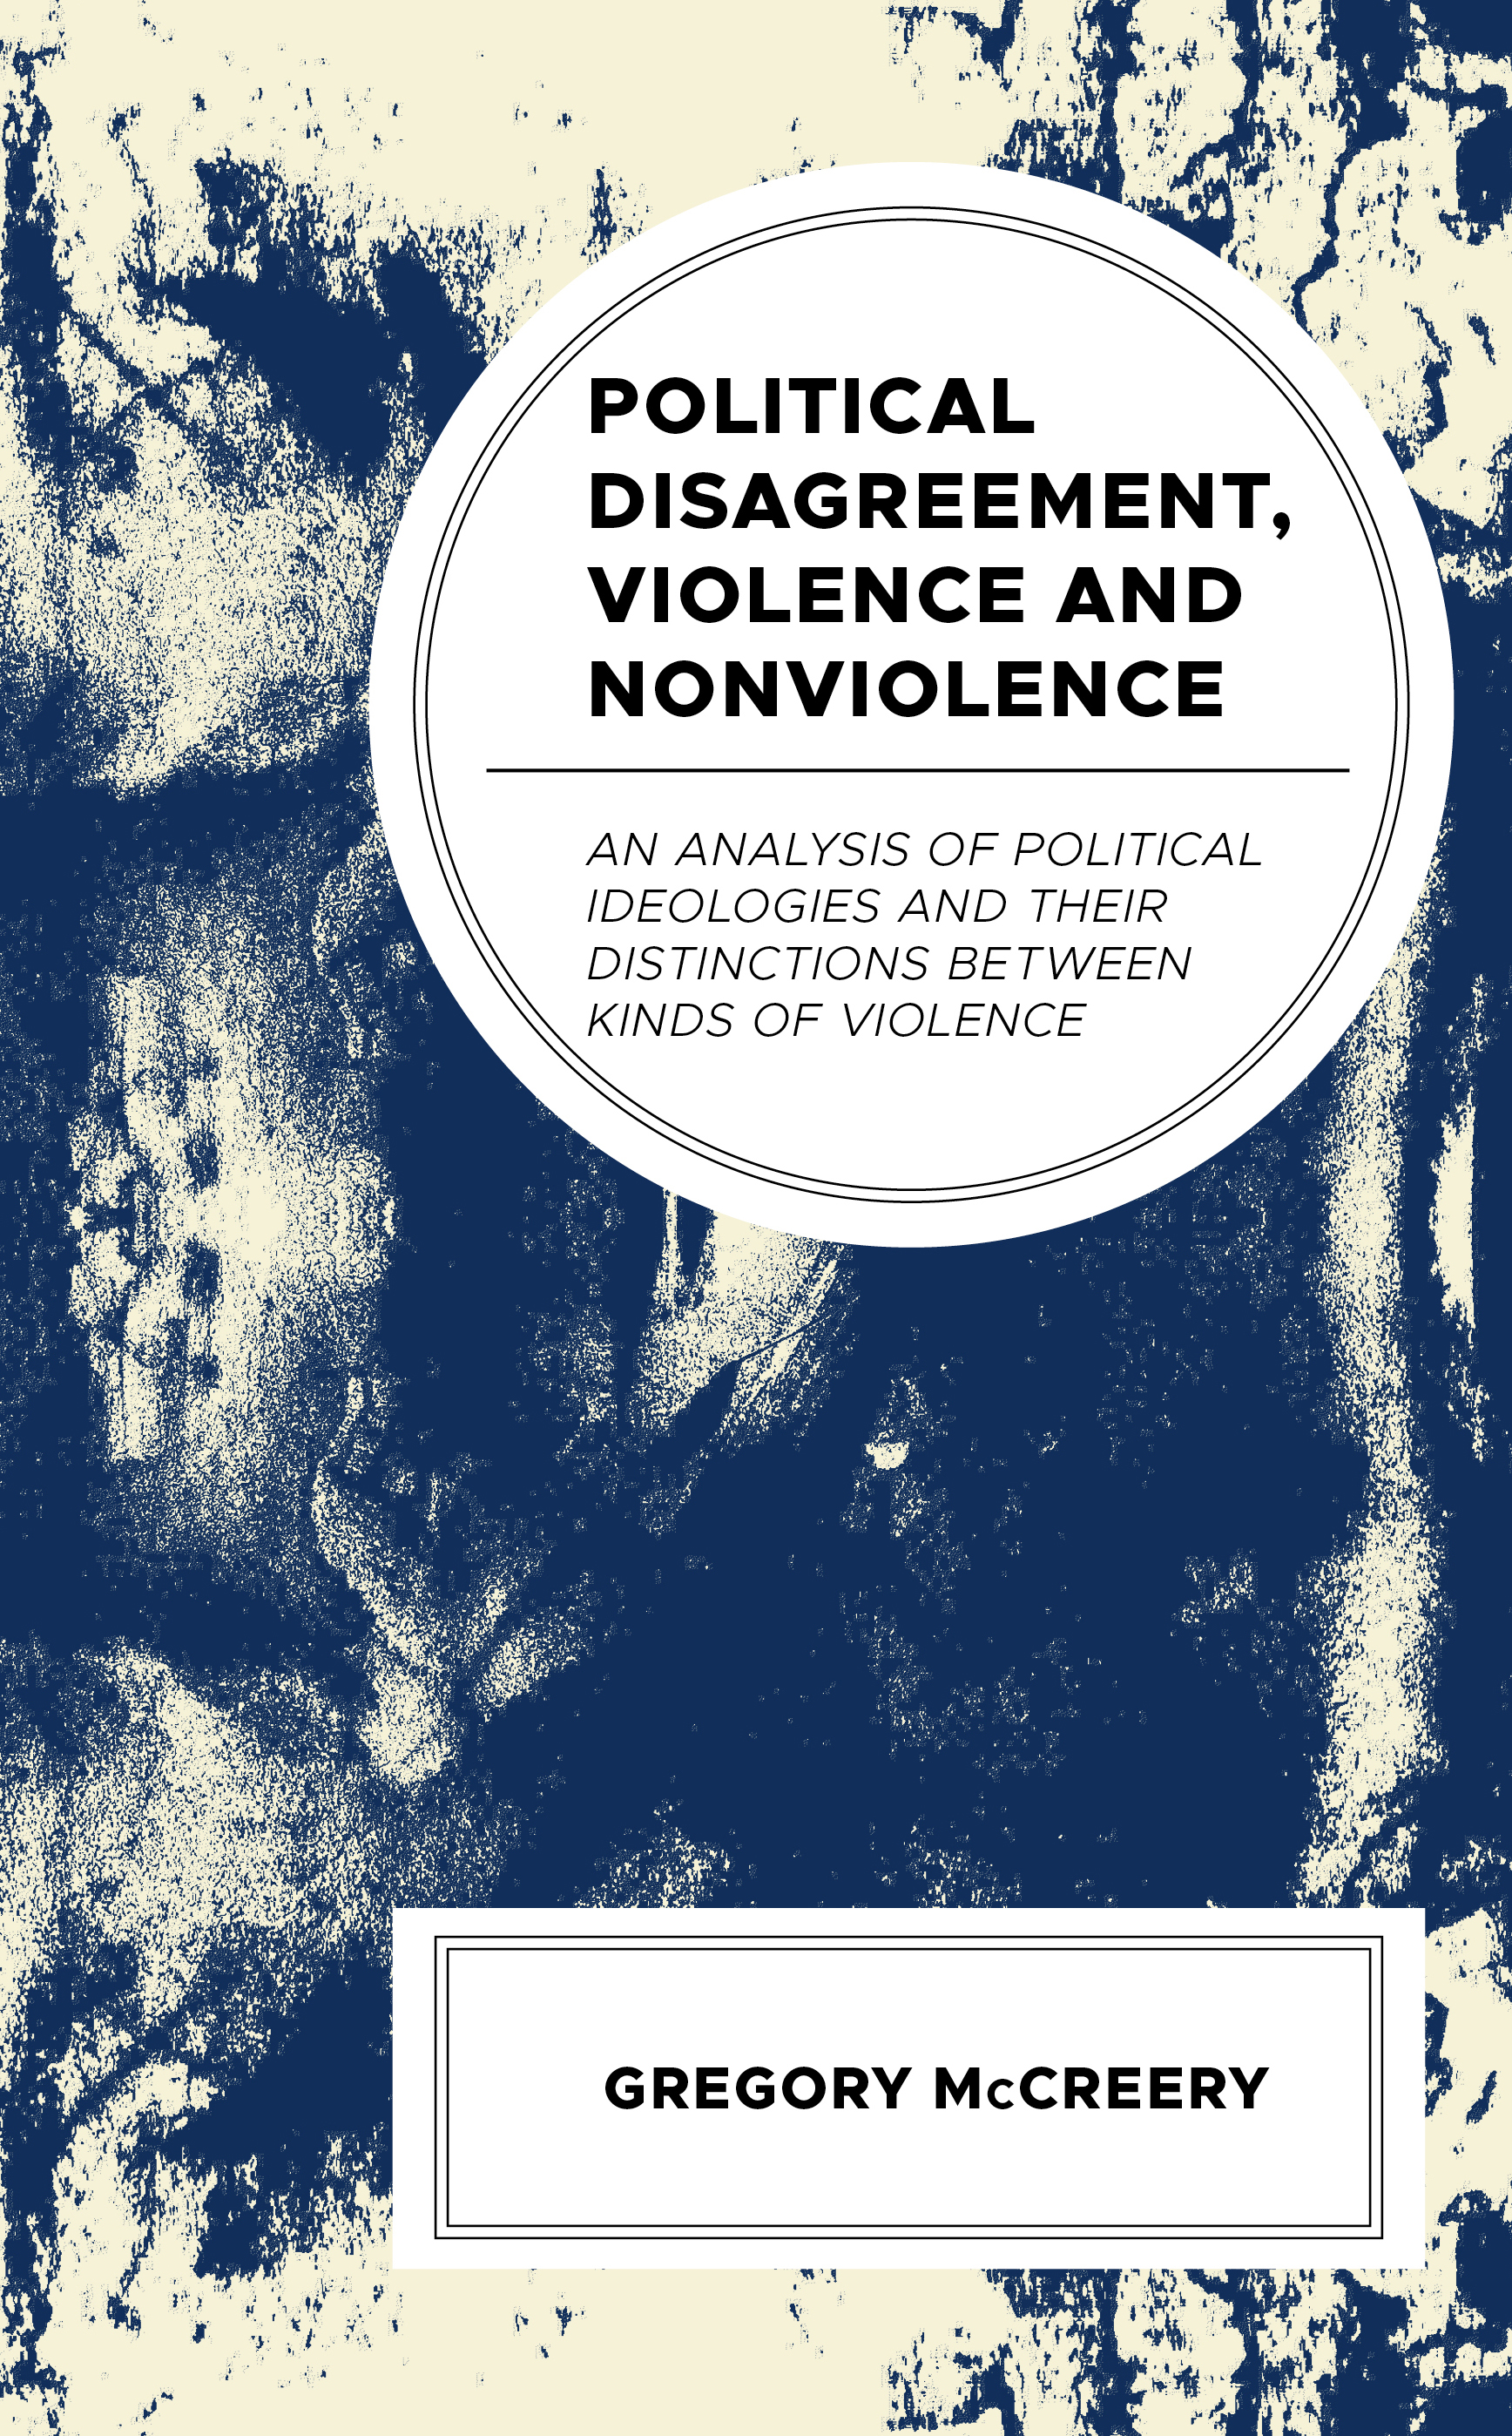 Political Disagreement, Violence and Nonviolence: An Analysis of Political Ideologies and their Distinctions between Kinds of Violence